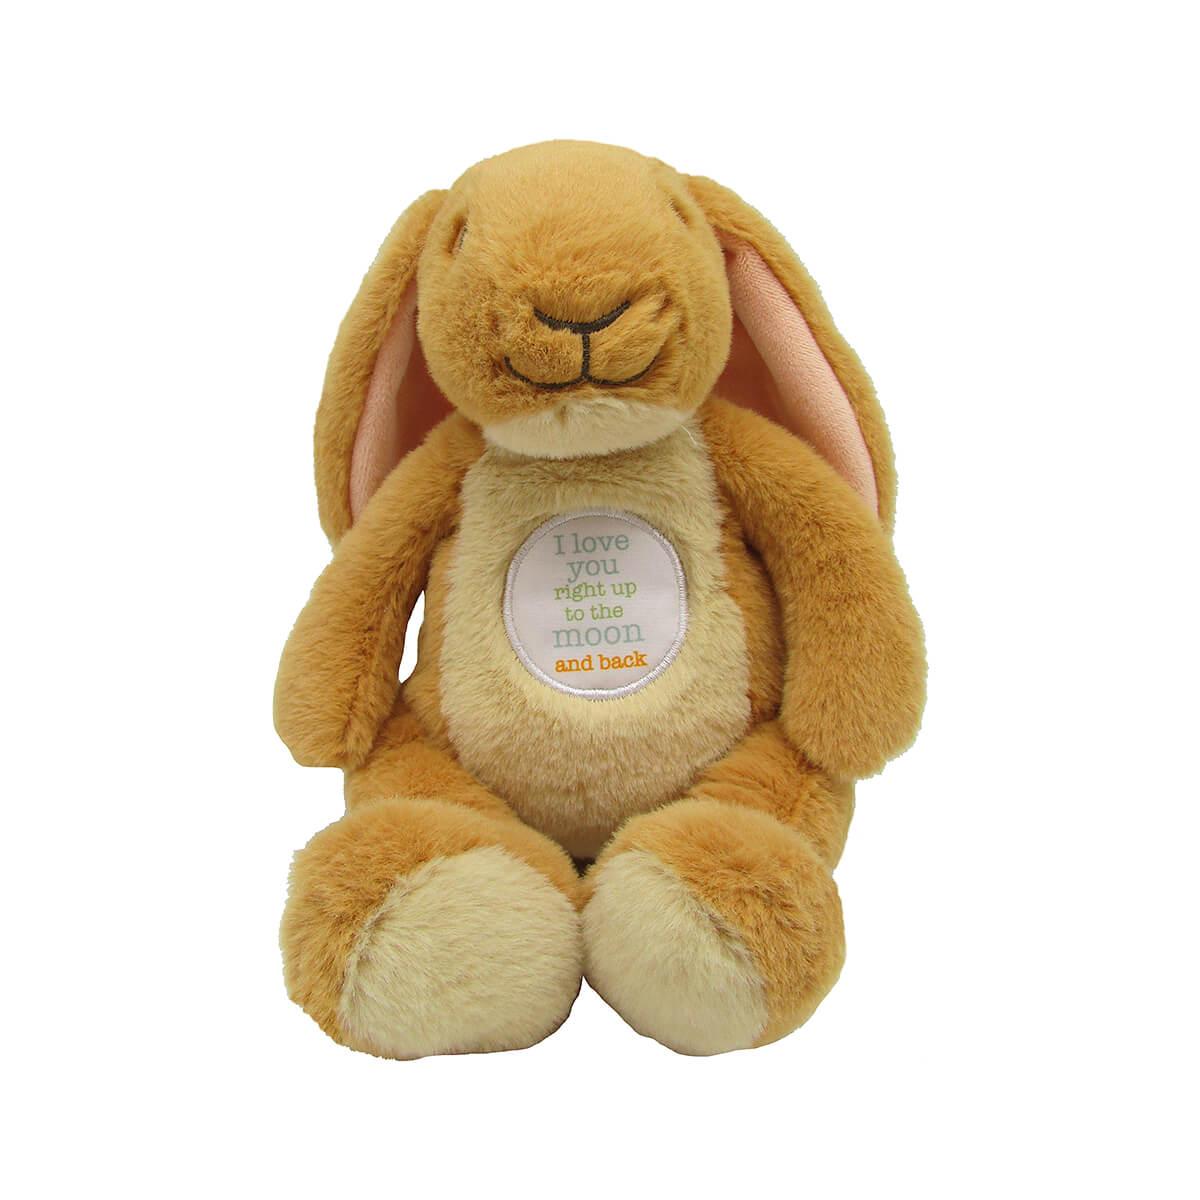  Nutbrown Hare Bean Bag Plush Toy